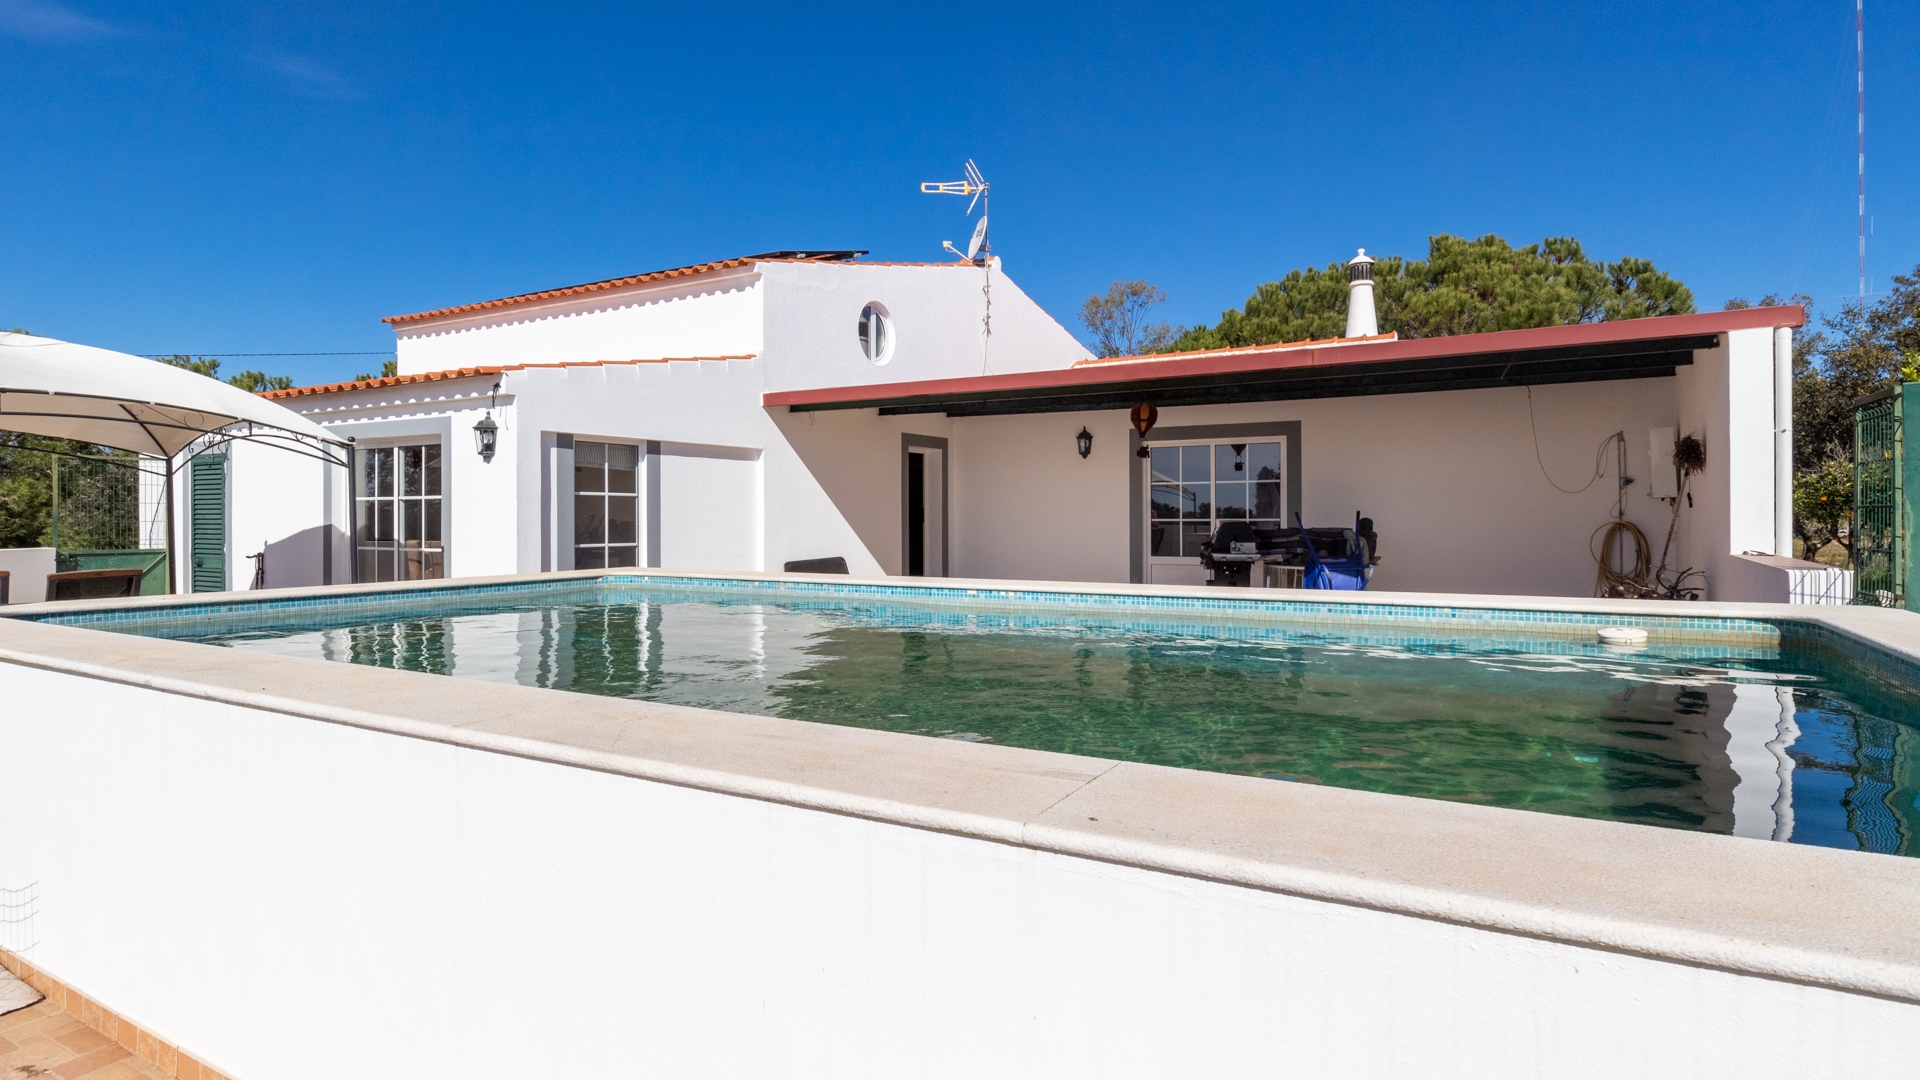 4 Bedroom Quinta Located on a Huge Plot Ideal for Horses, with a Lake near Alcoutim, East Algarve | TV2077 